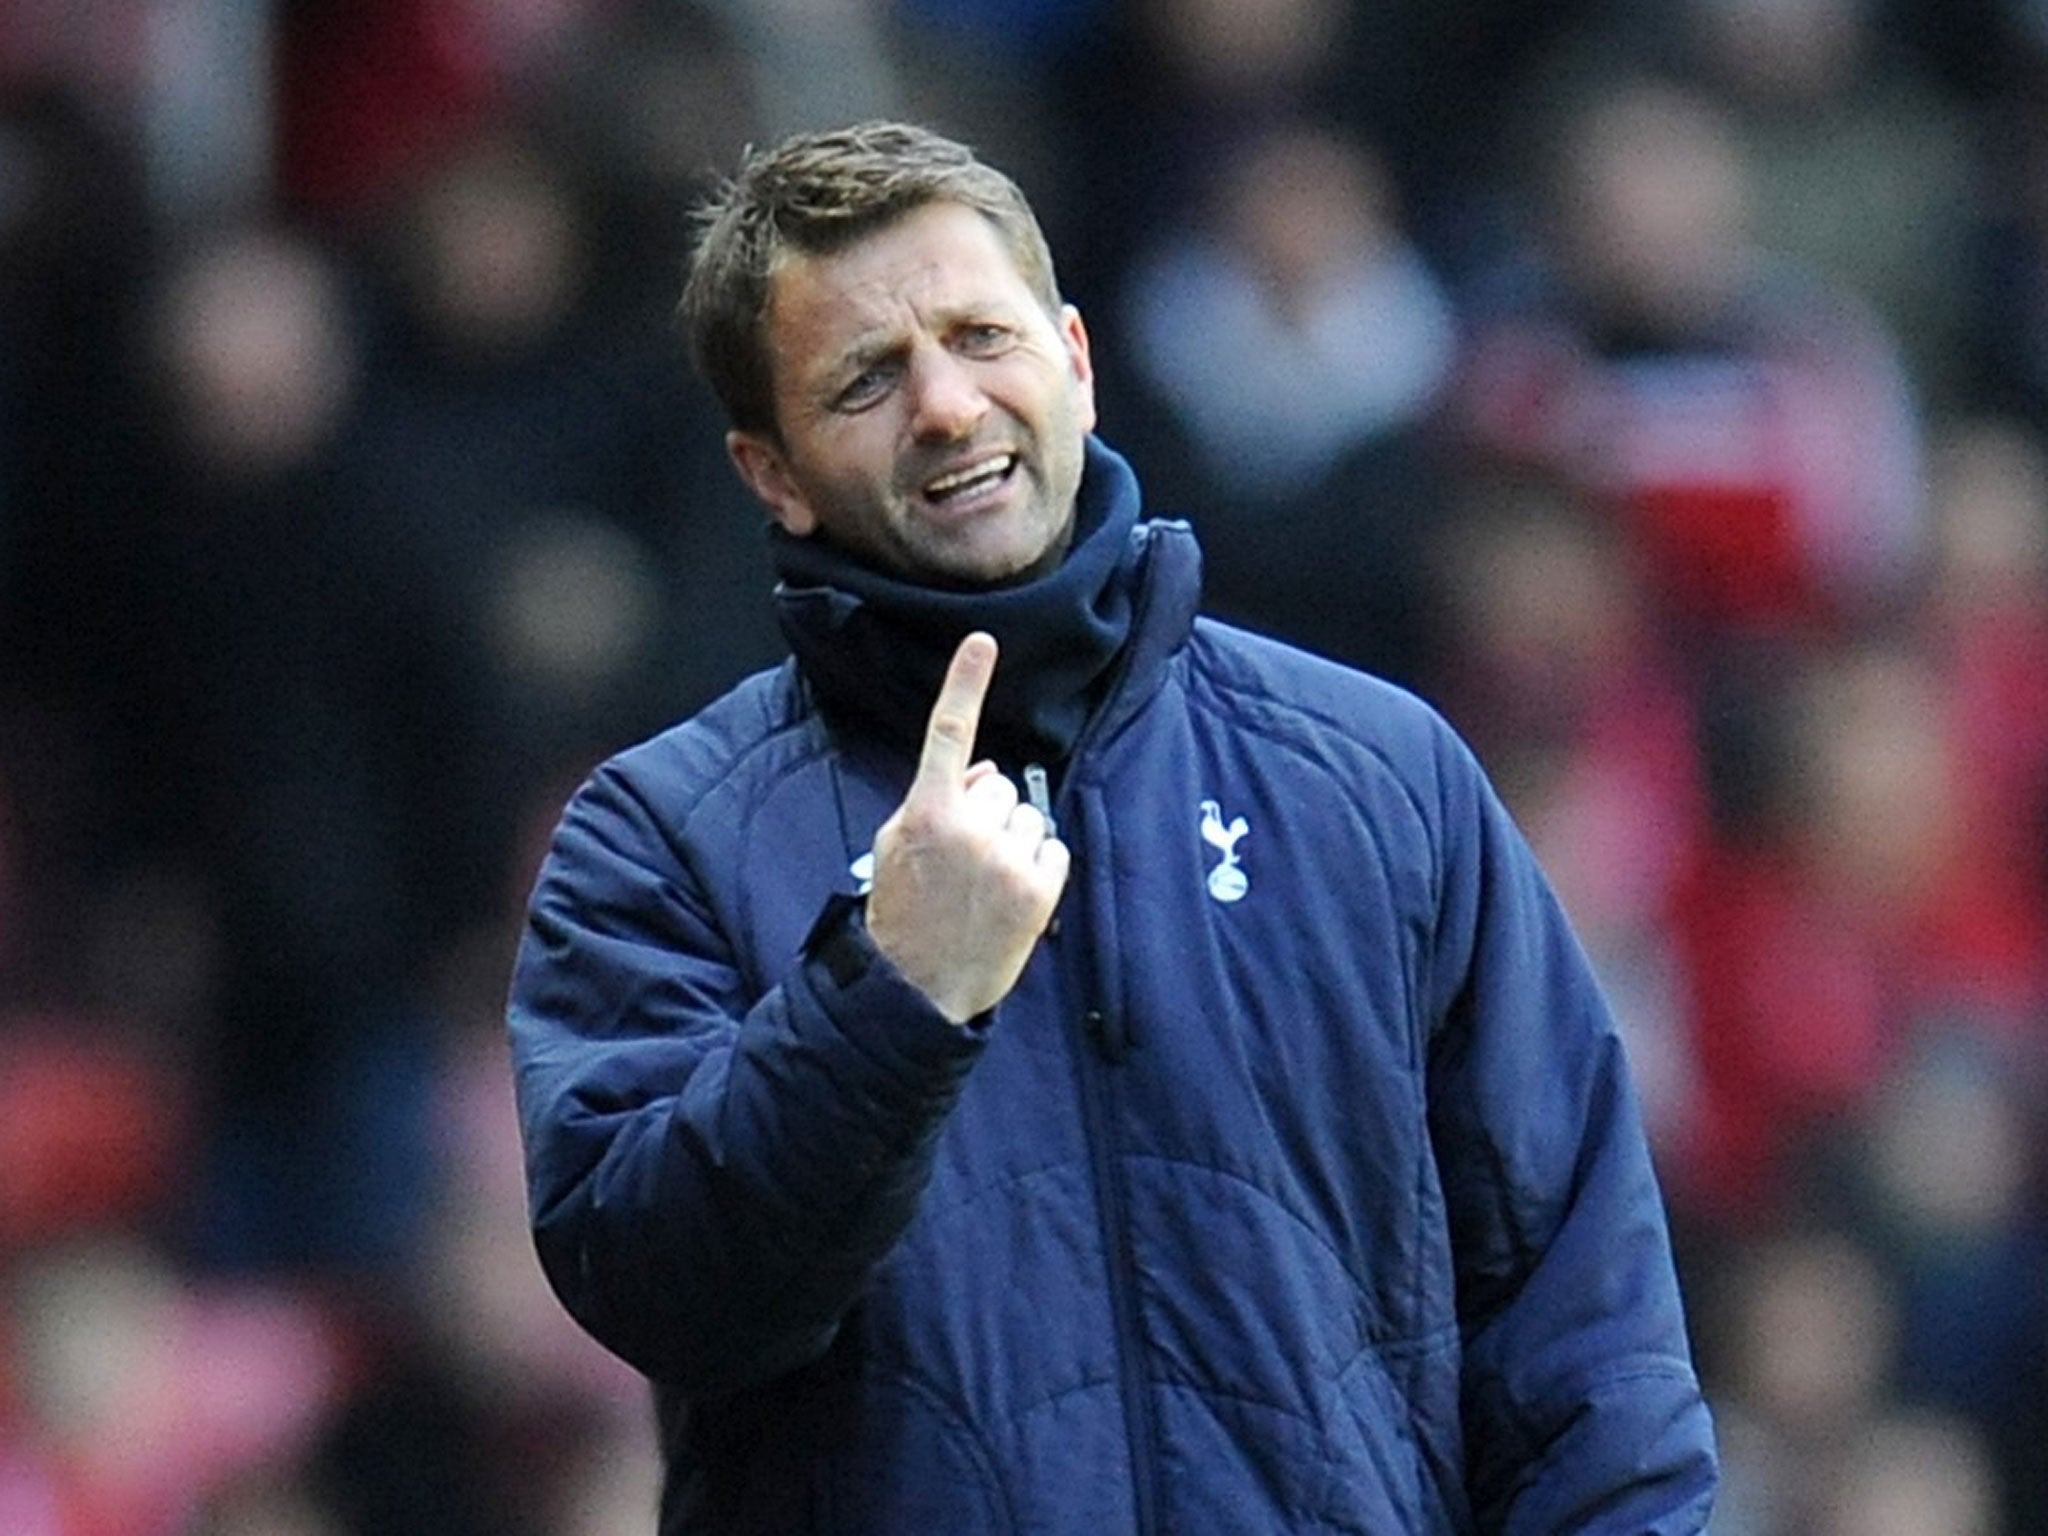 Tim Sherwood has been dismissed by some for his lack of experience but has excelled working with Spurs' Under-21 side and oversaw an excellent win at Southampton